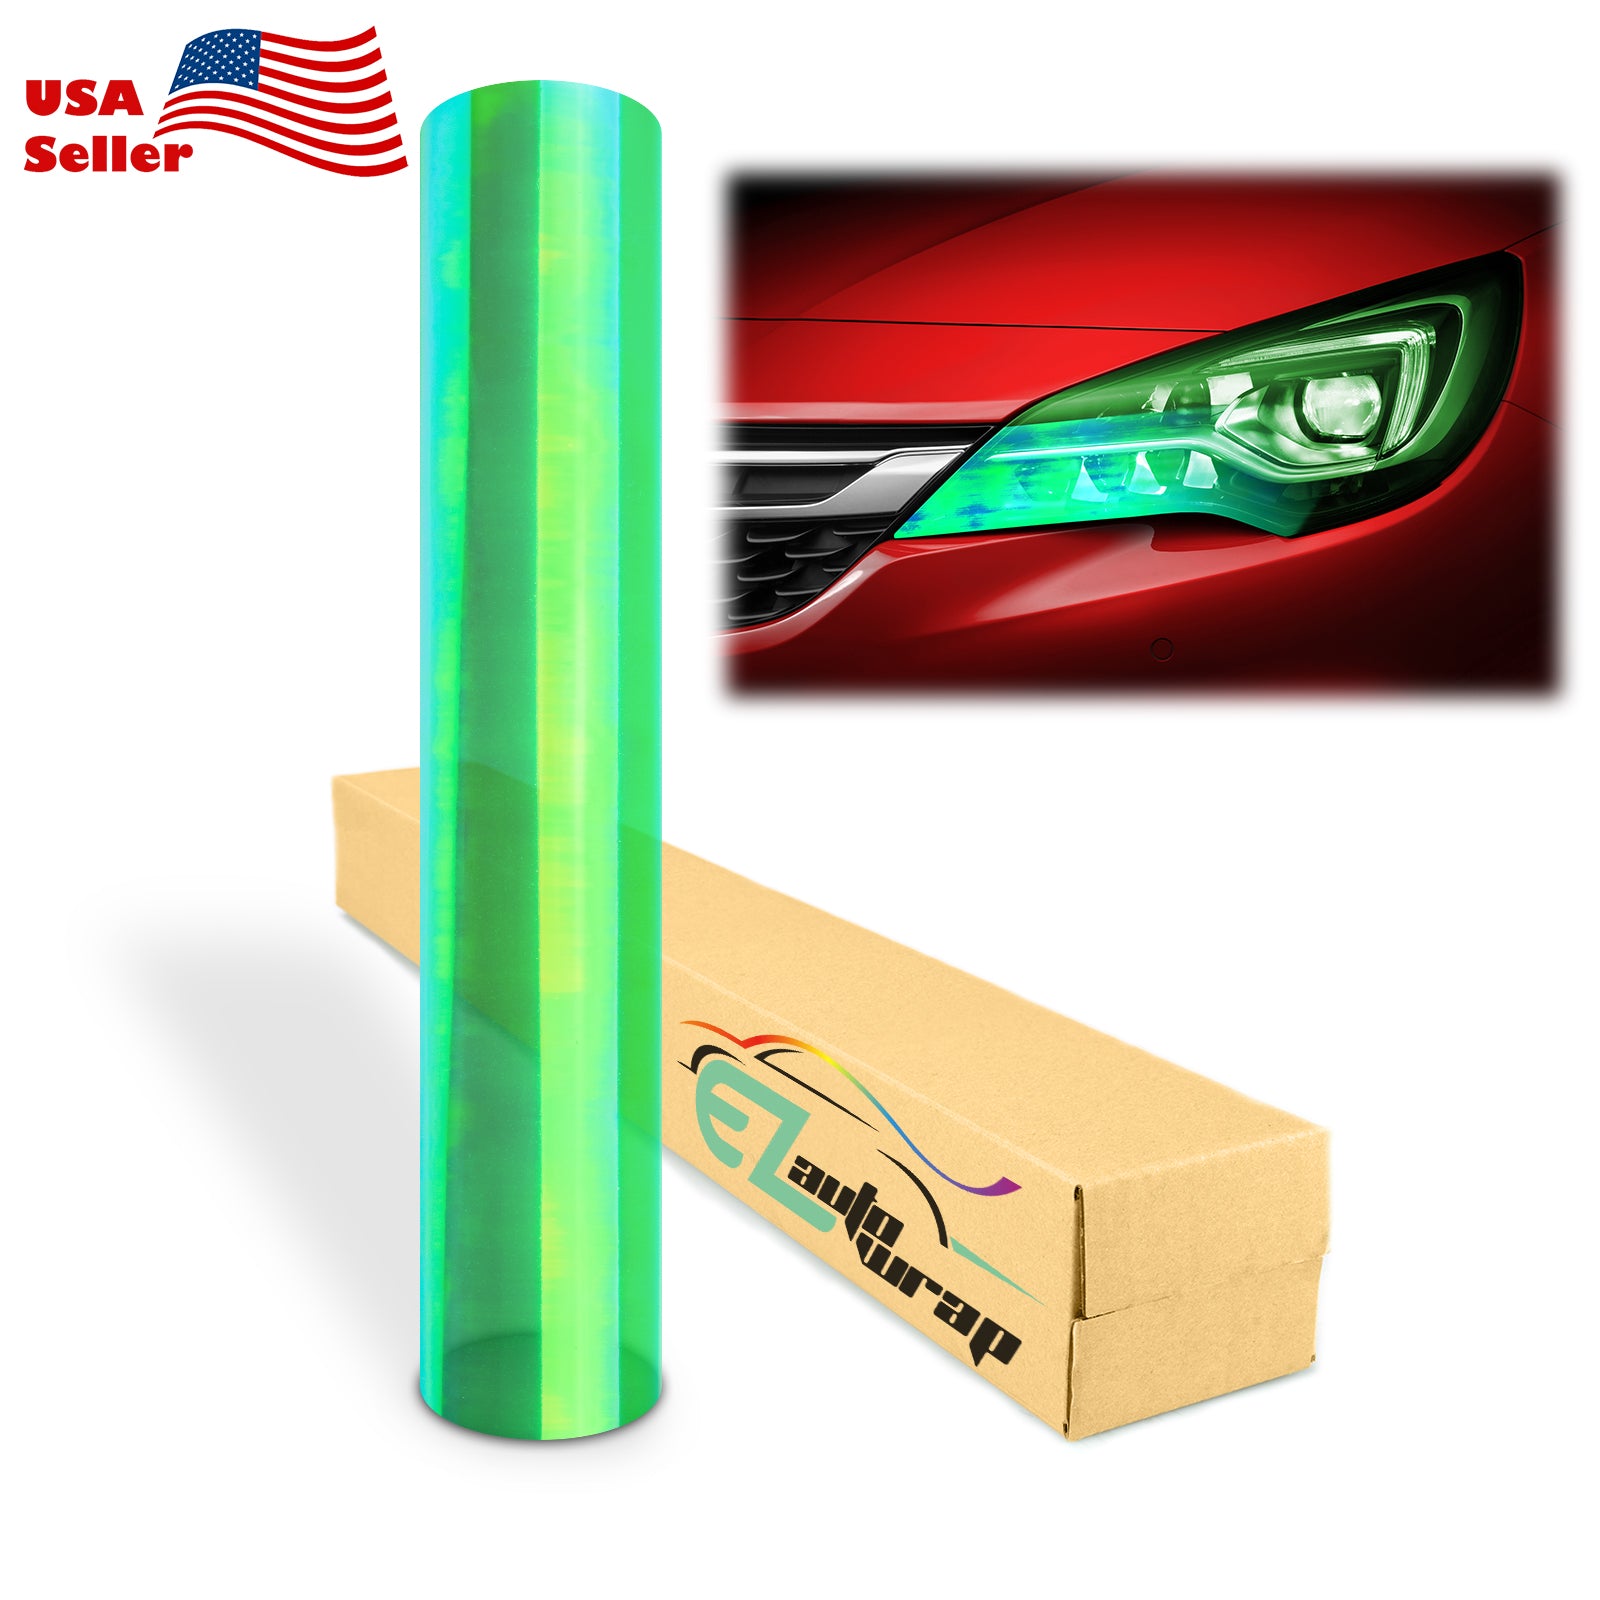 Extra Wide Chameleon Neo Pearl Green Taillight Headlight Tint Film